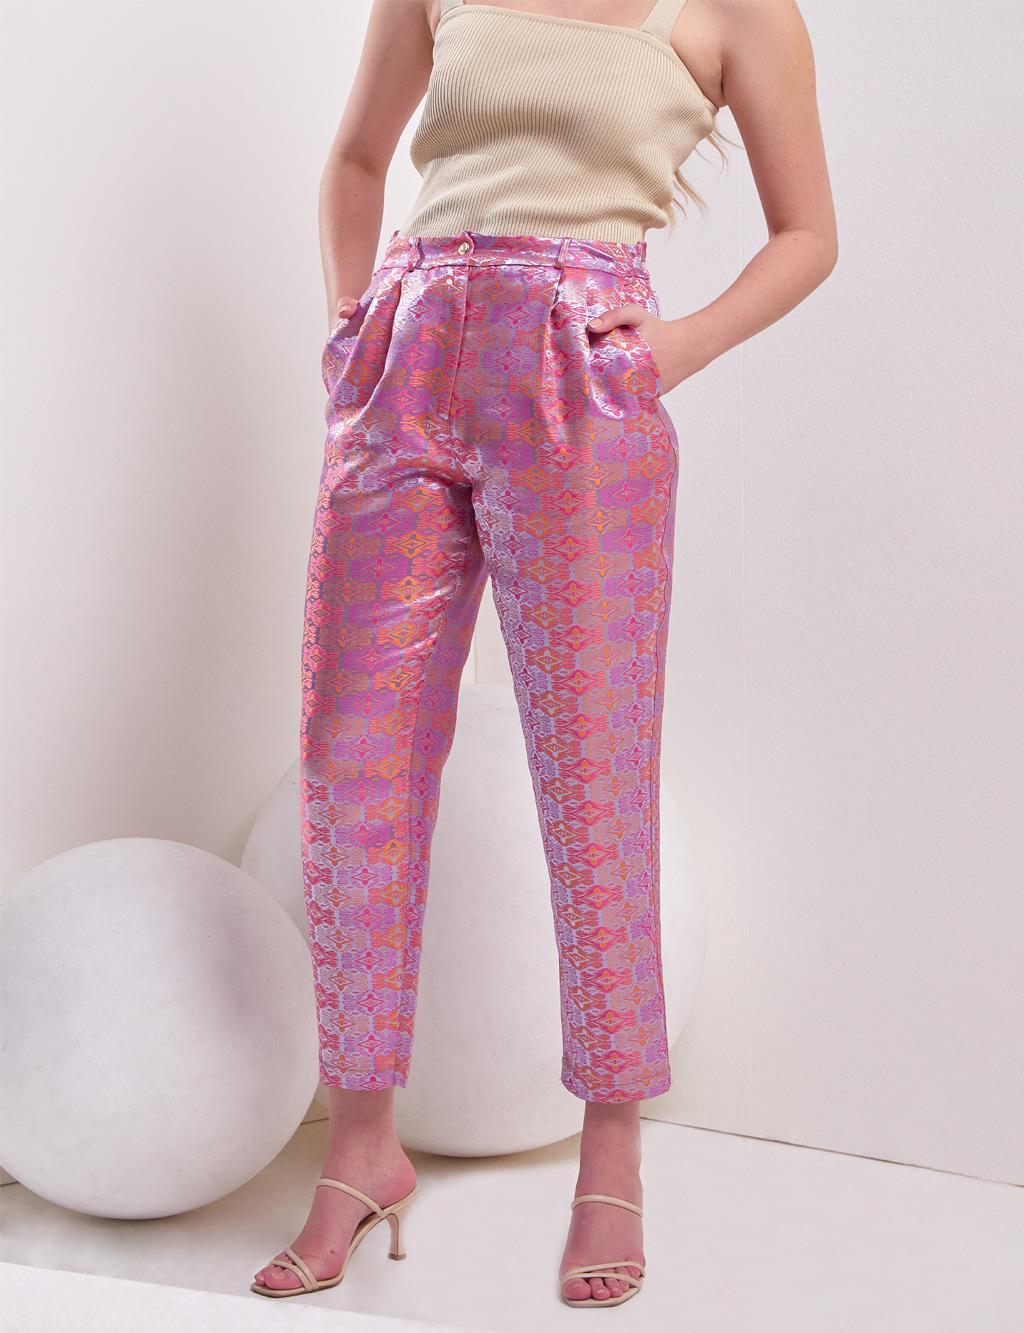 Brocade Patterned Pleated Pants Candy Pink